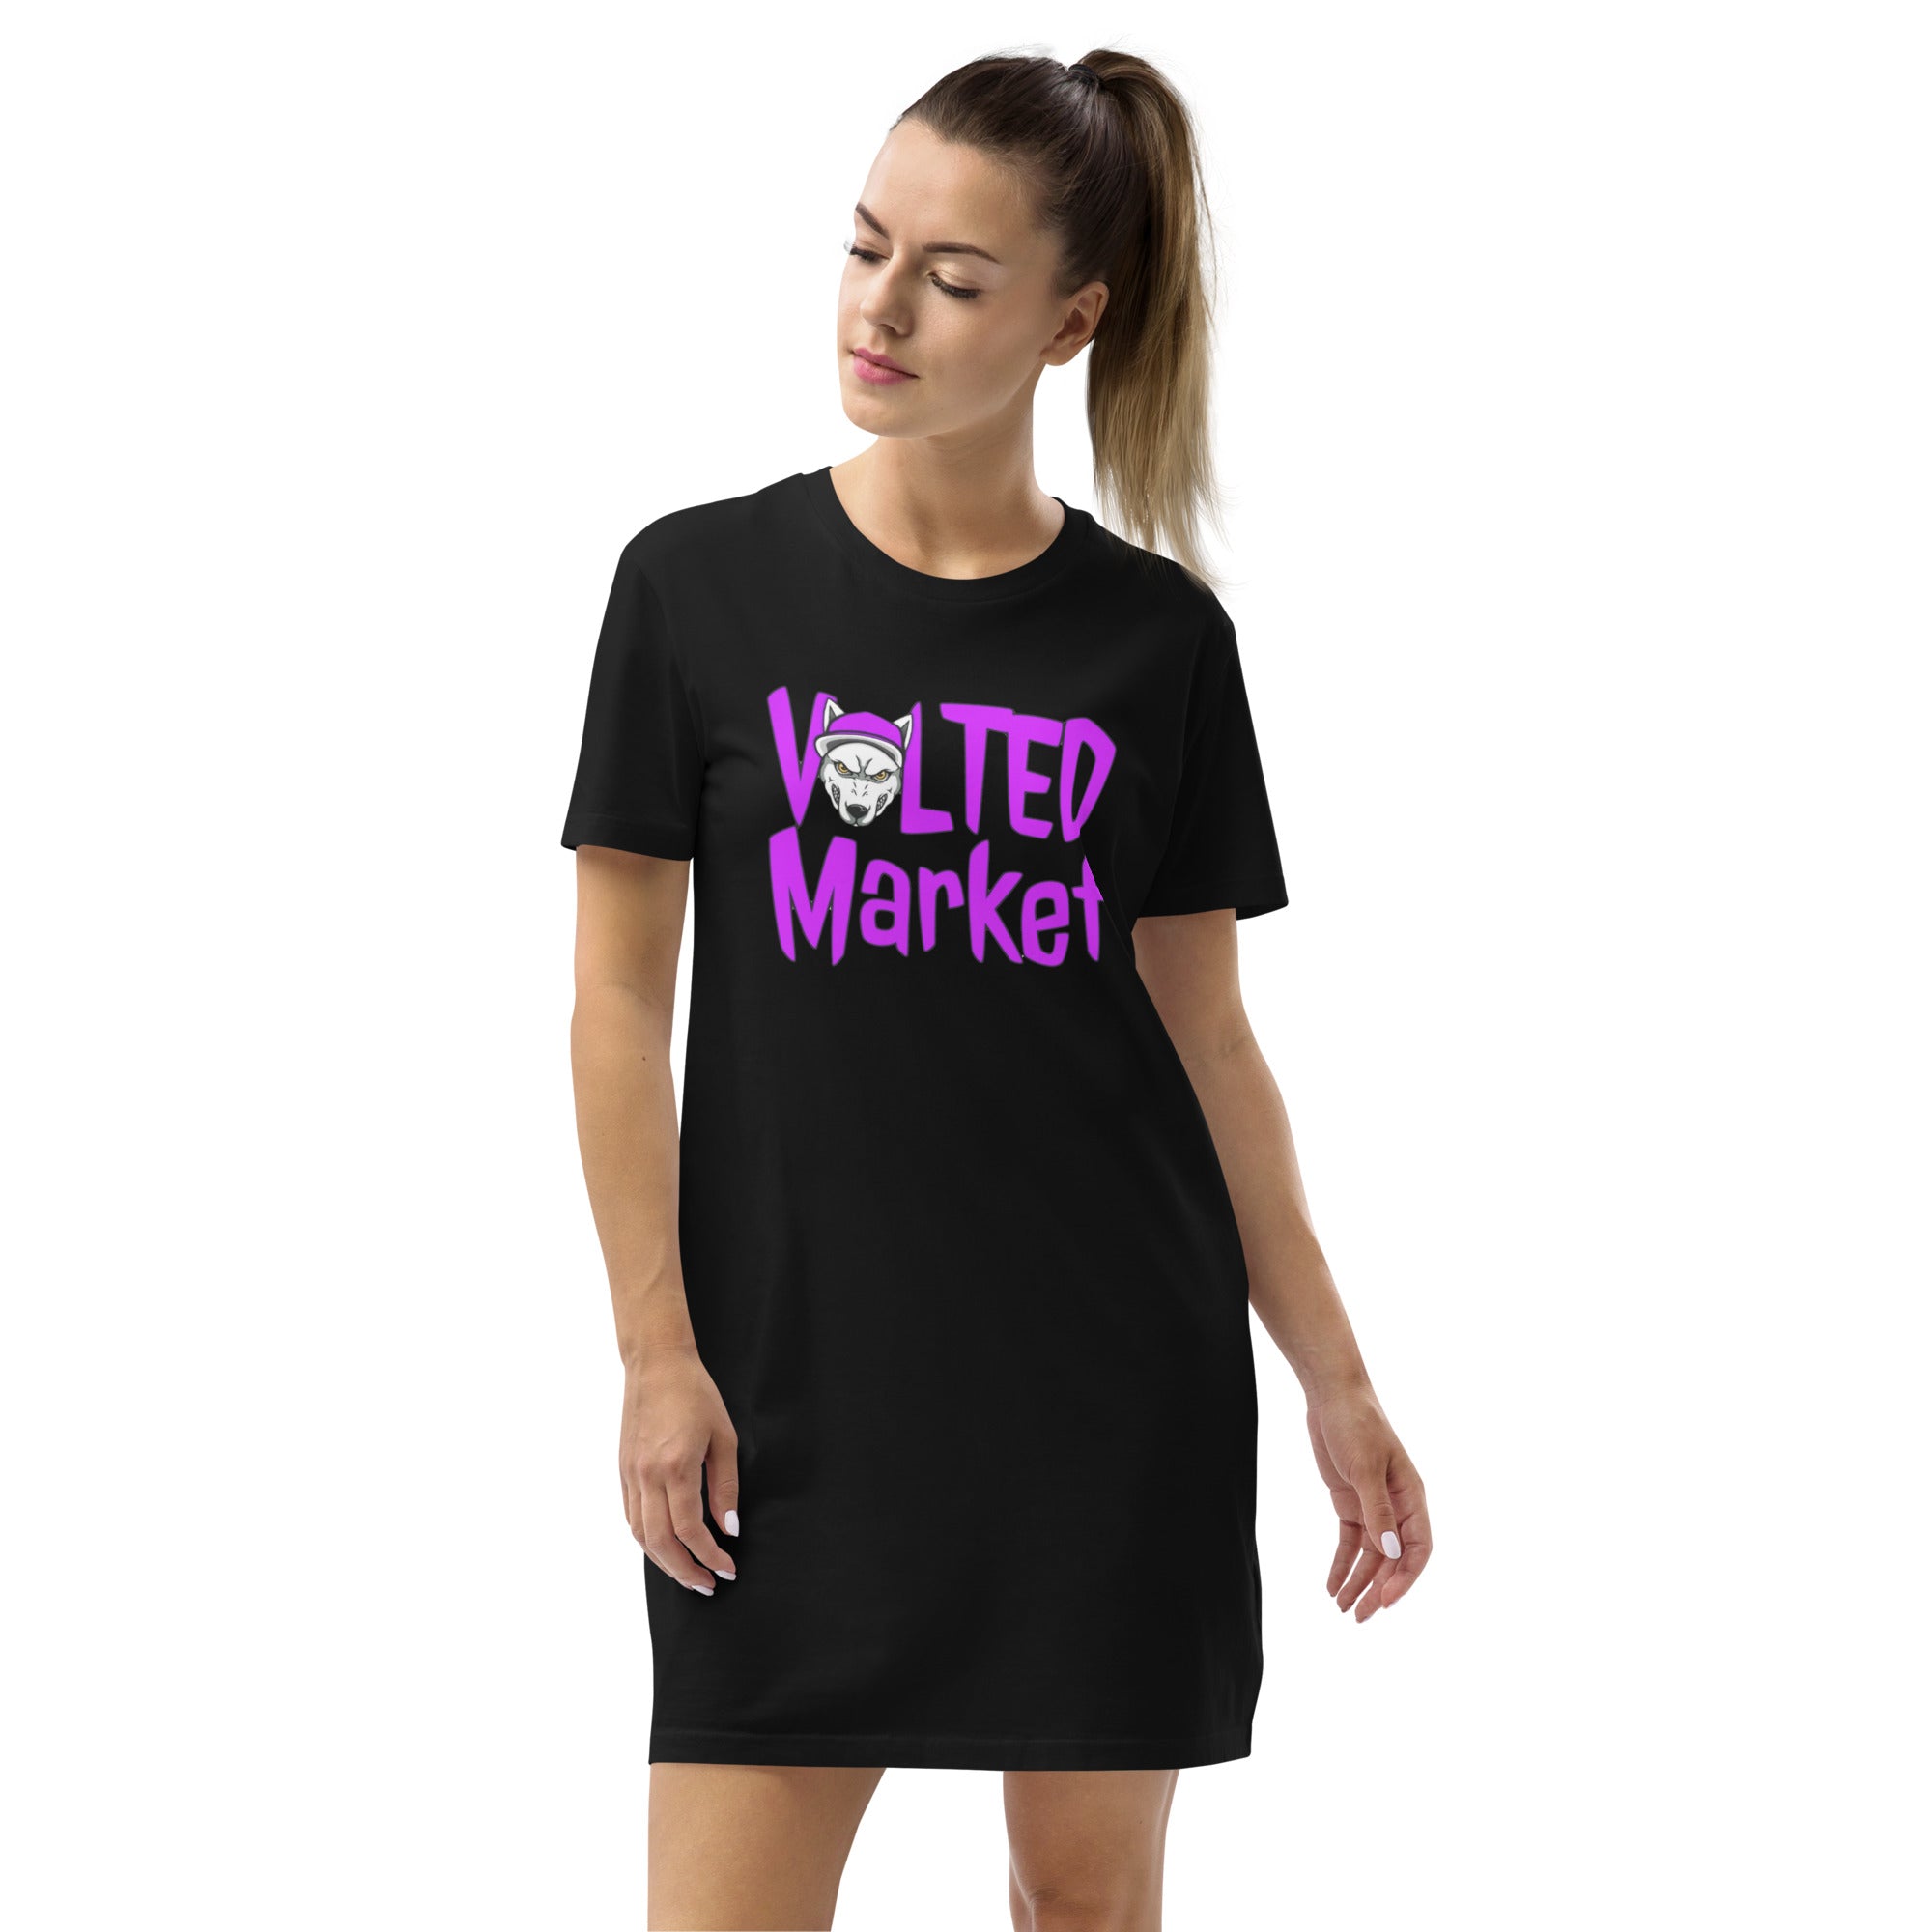 Volted Market Tshirt Dress⚡️NFTees - NFTees365